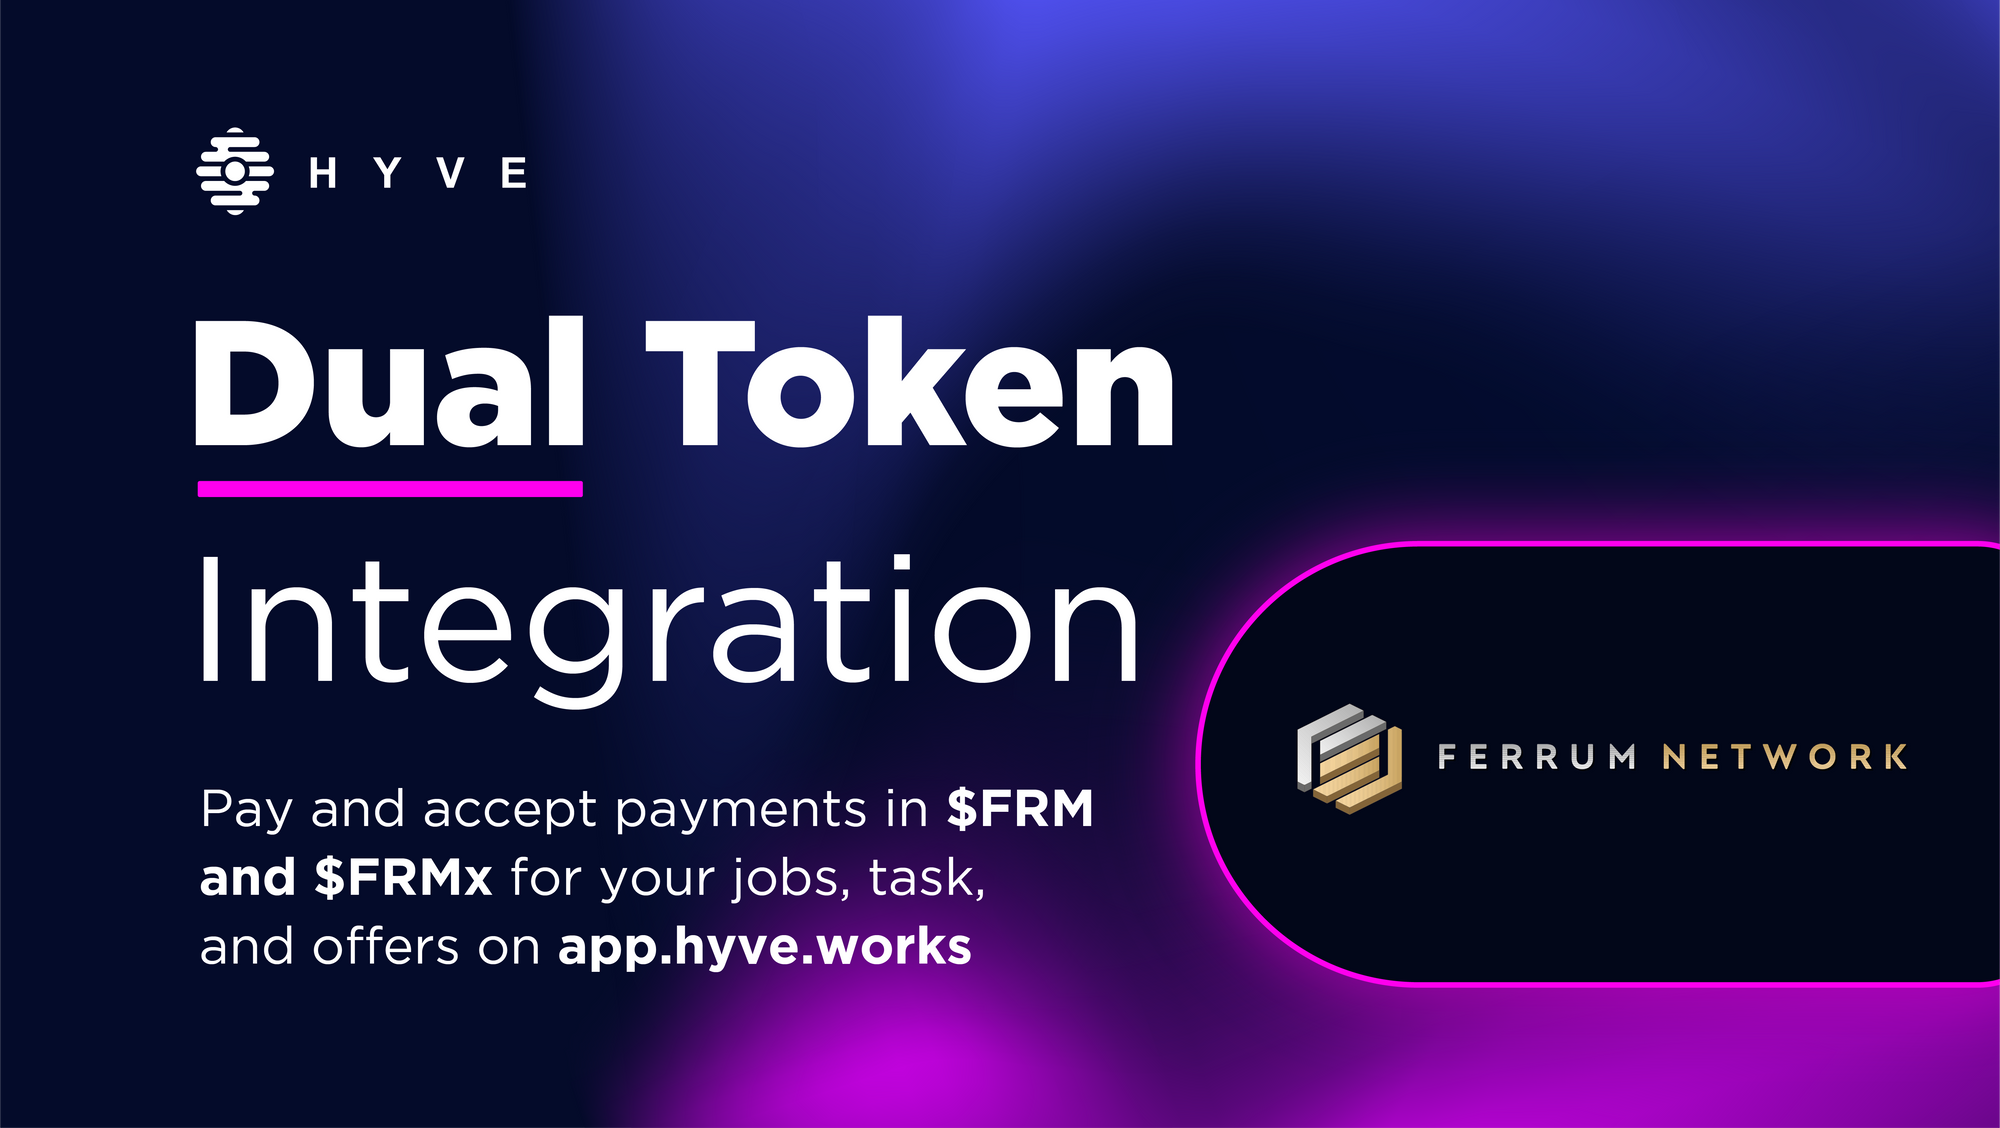 Dual Token Integration: $FRM & $FRMx are now available on HYVE